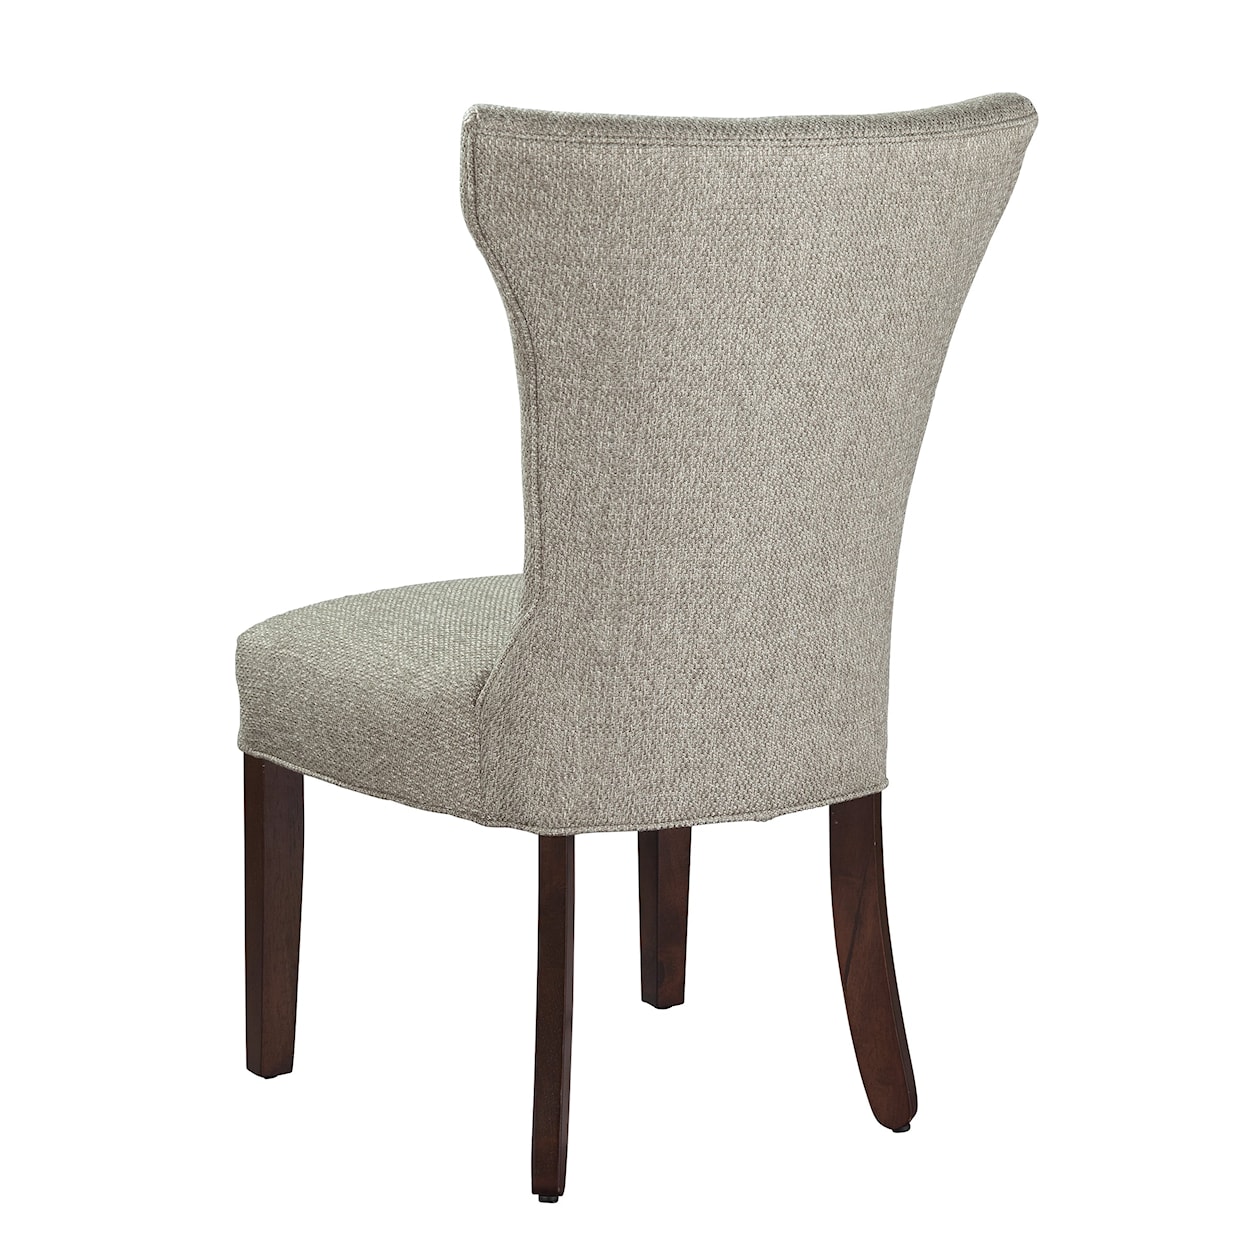 Hekman Upholstery Bryn Dining Chair with Buttons